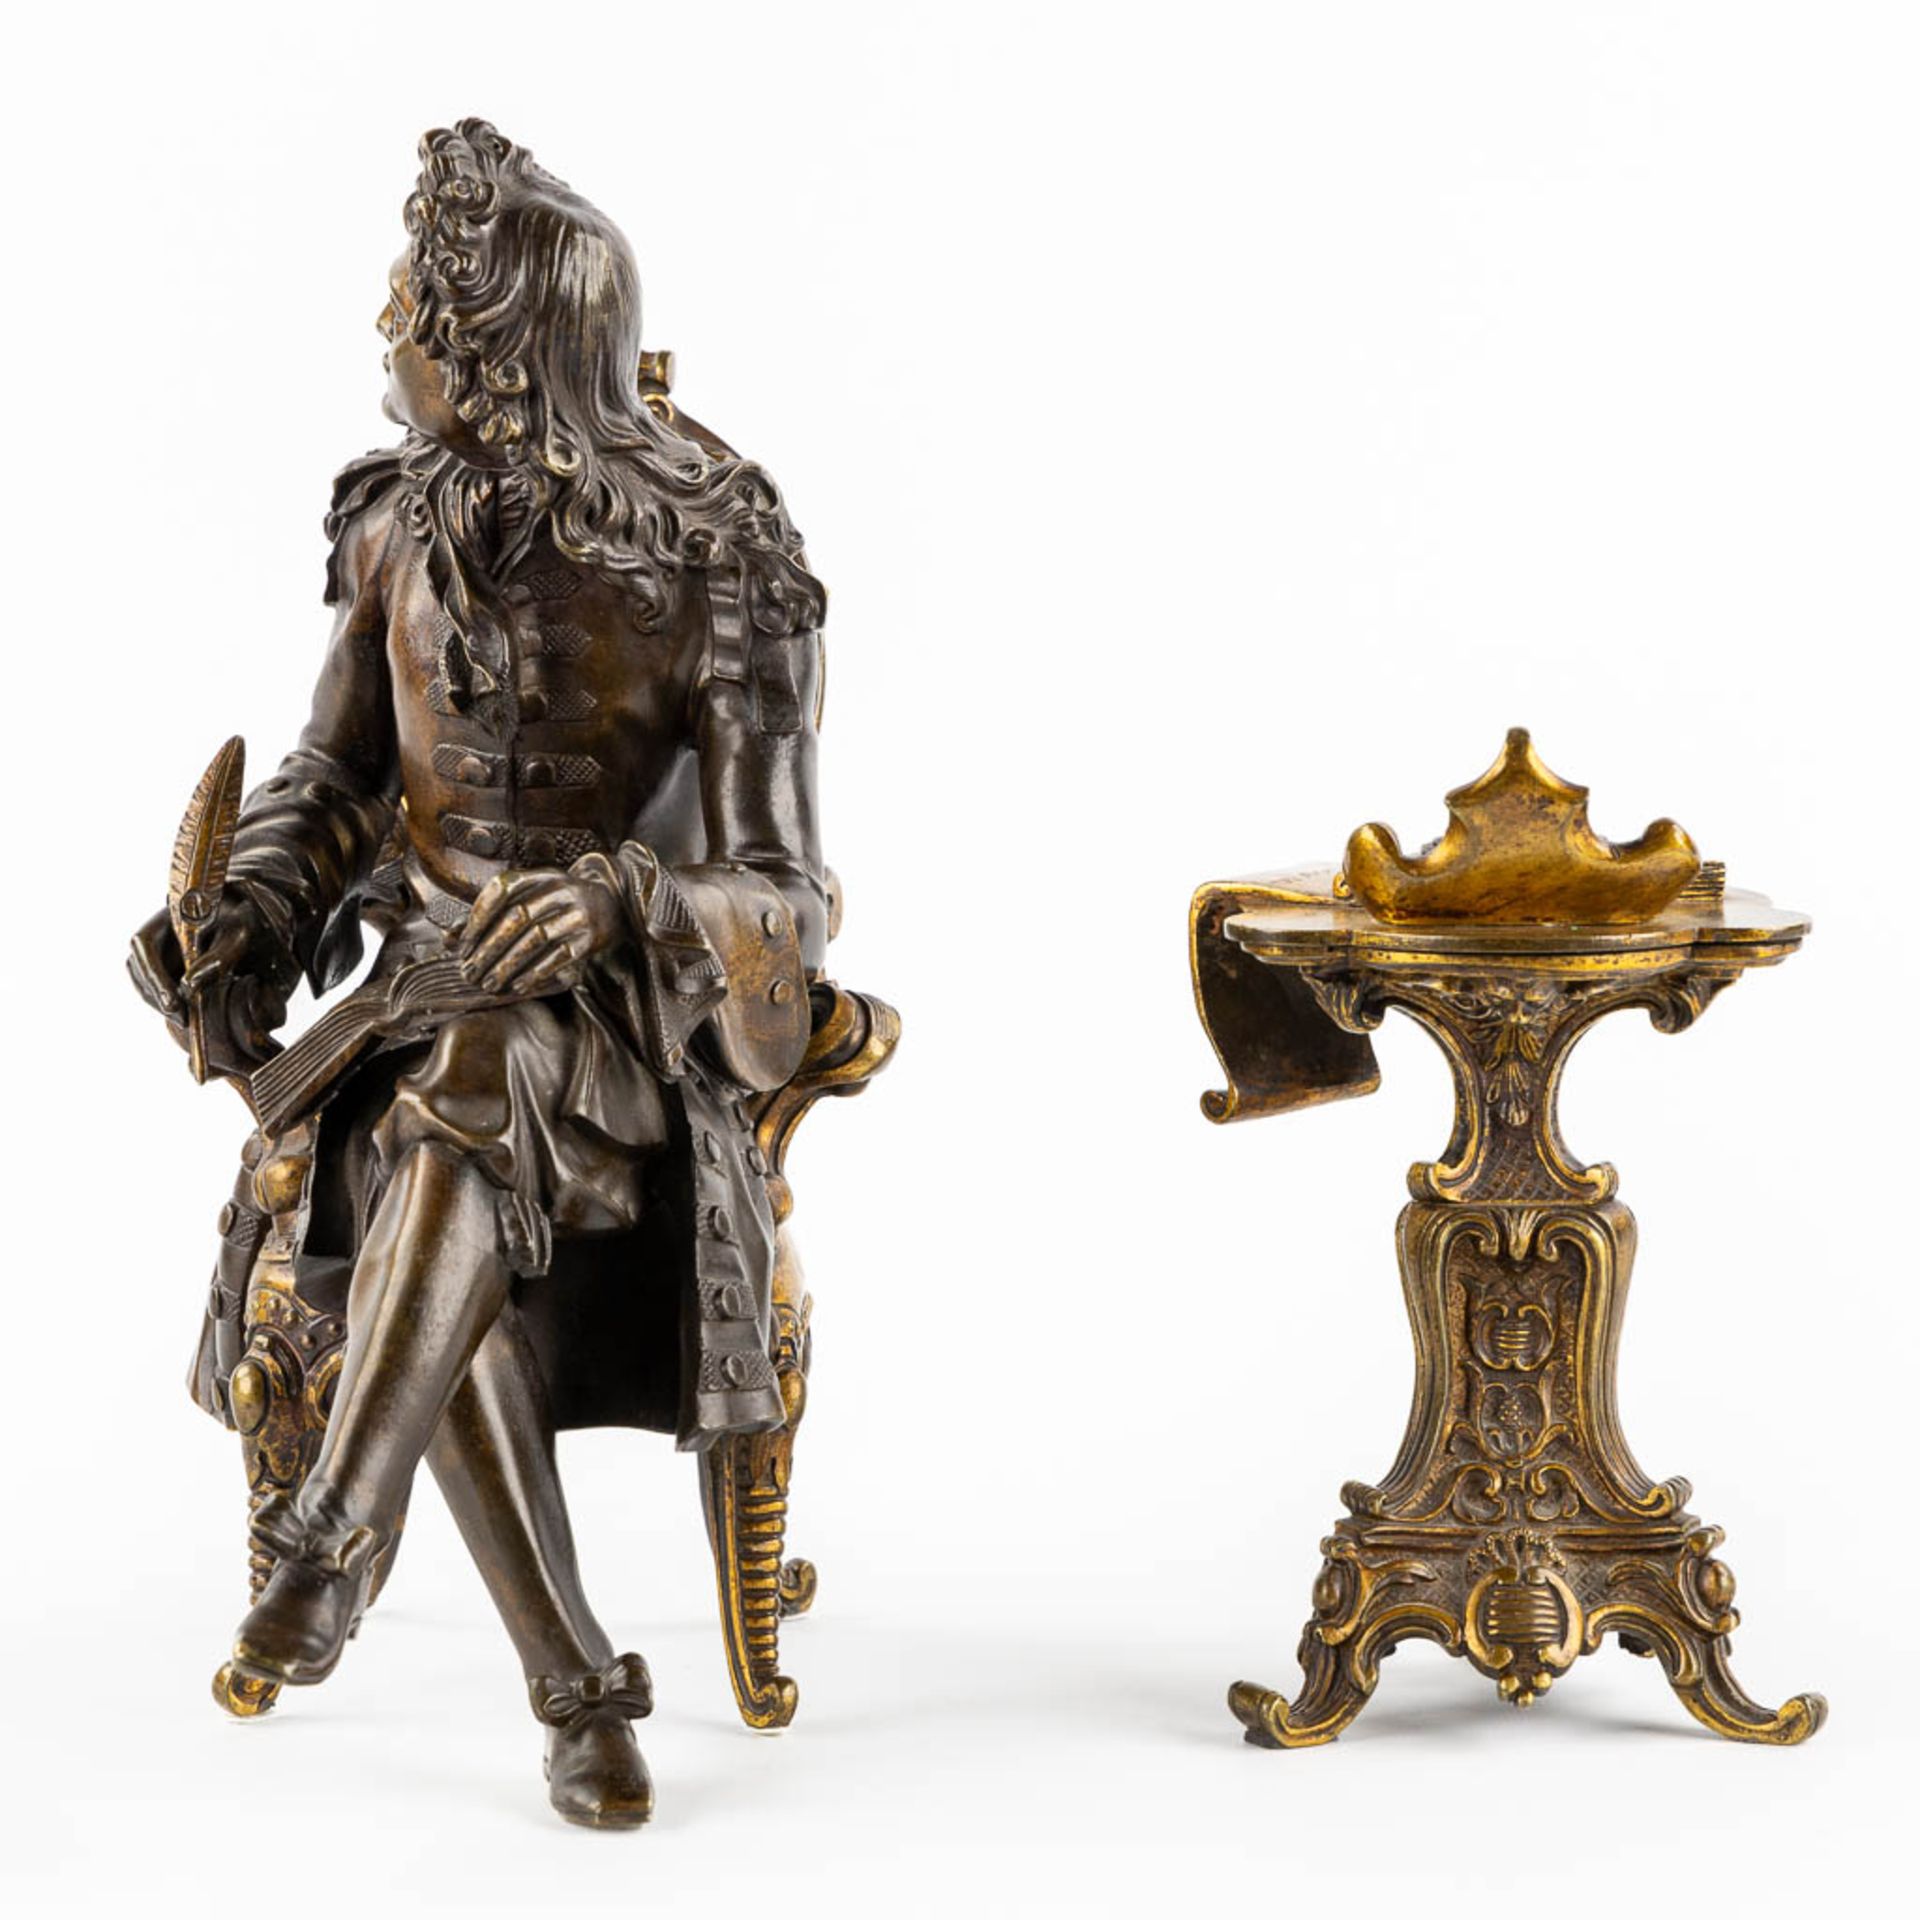 Pascal Collasse, a patinated and gilt bronze figurine. Circa 1900. (L:15 x W:25 x H:29 cm) - Image 6 of 13